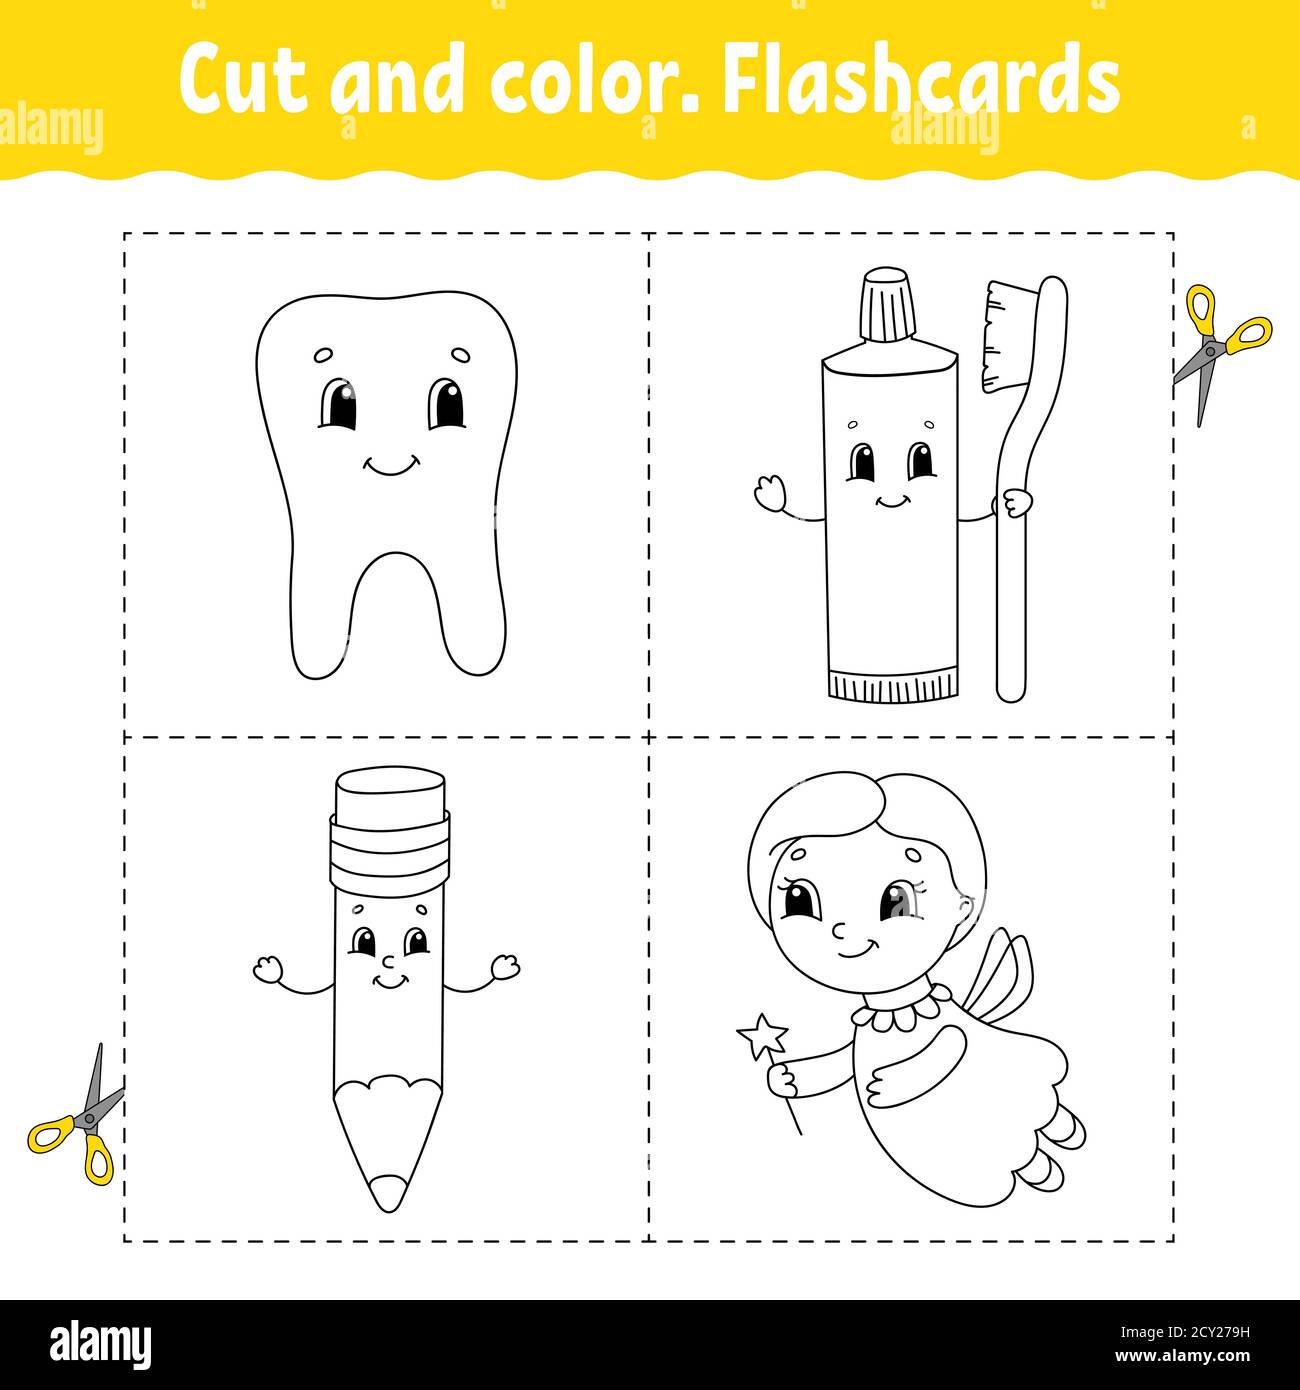 Cut and color. Flashcard Set. Coloring book for kids. Cartoon character. Stock Vector